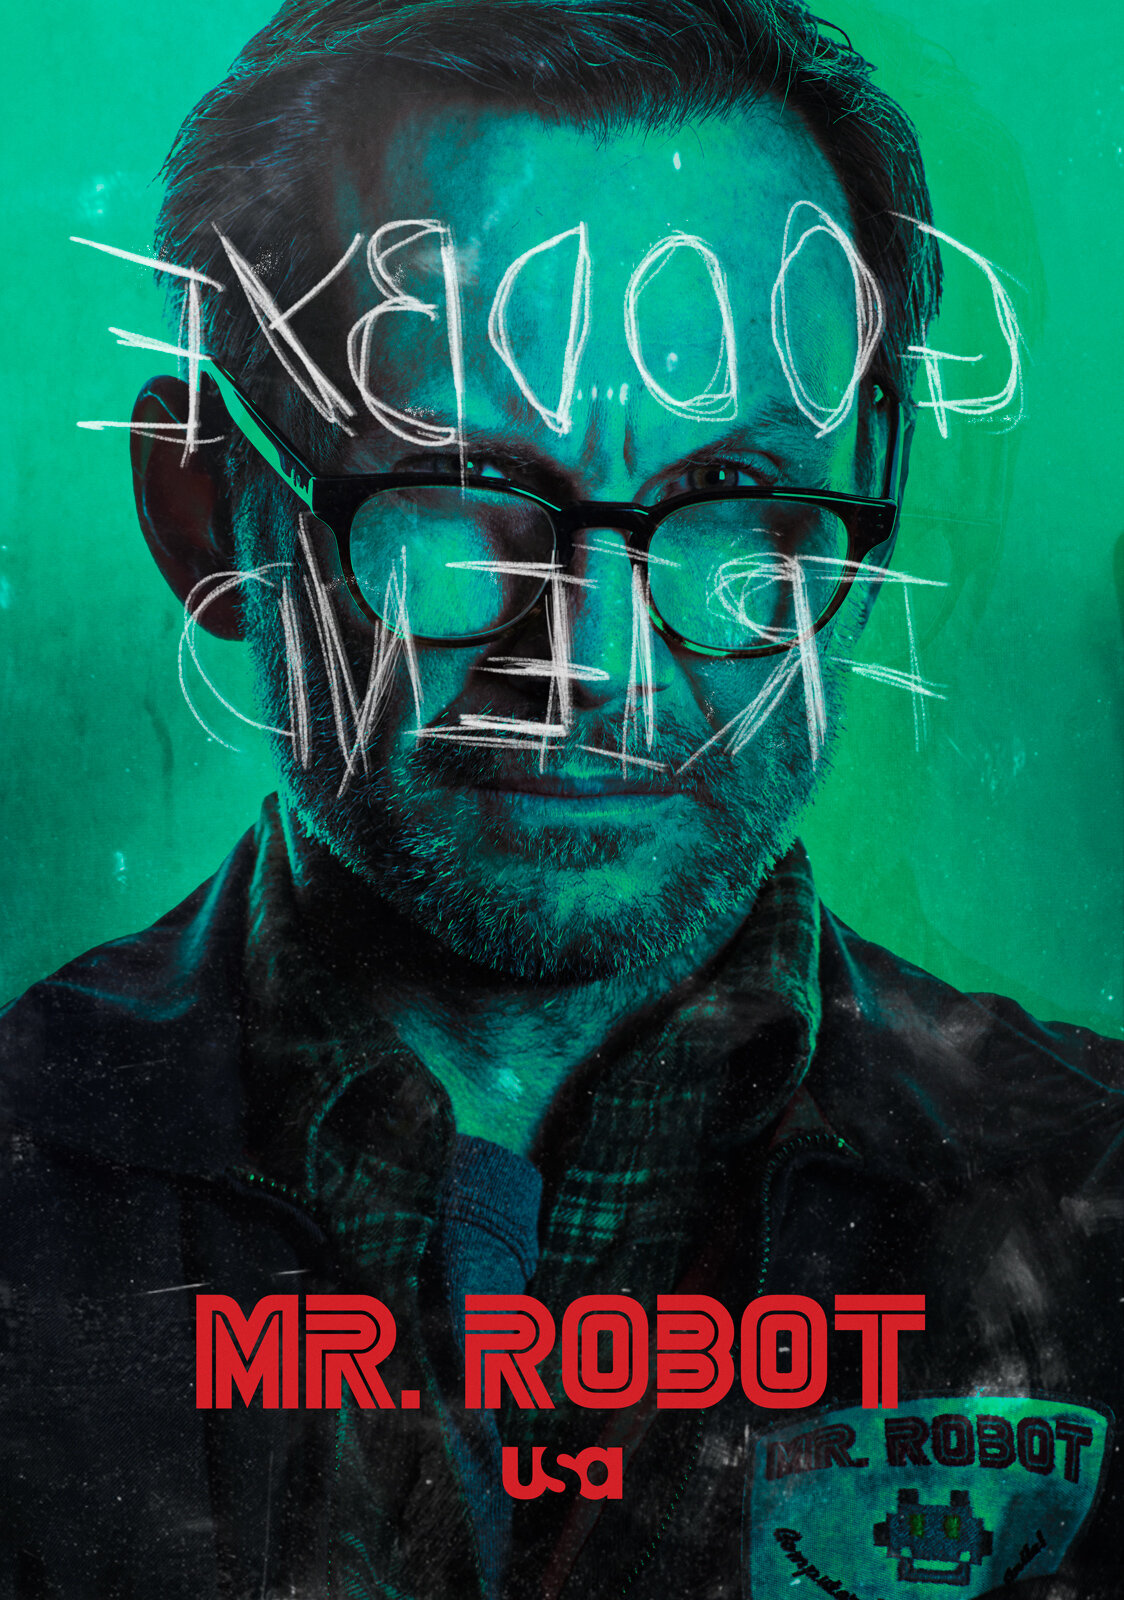 The Mr. Robot season 4 poster shows its holiday spirit